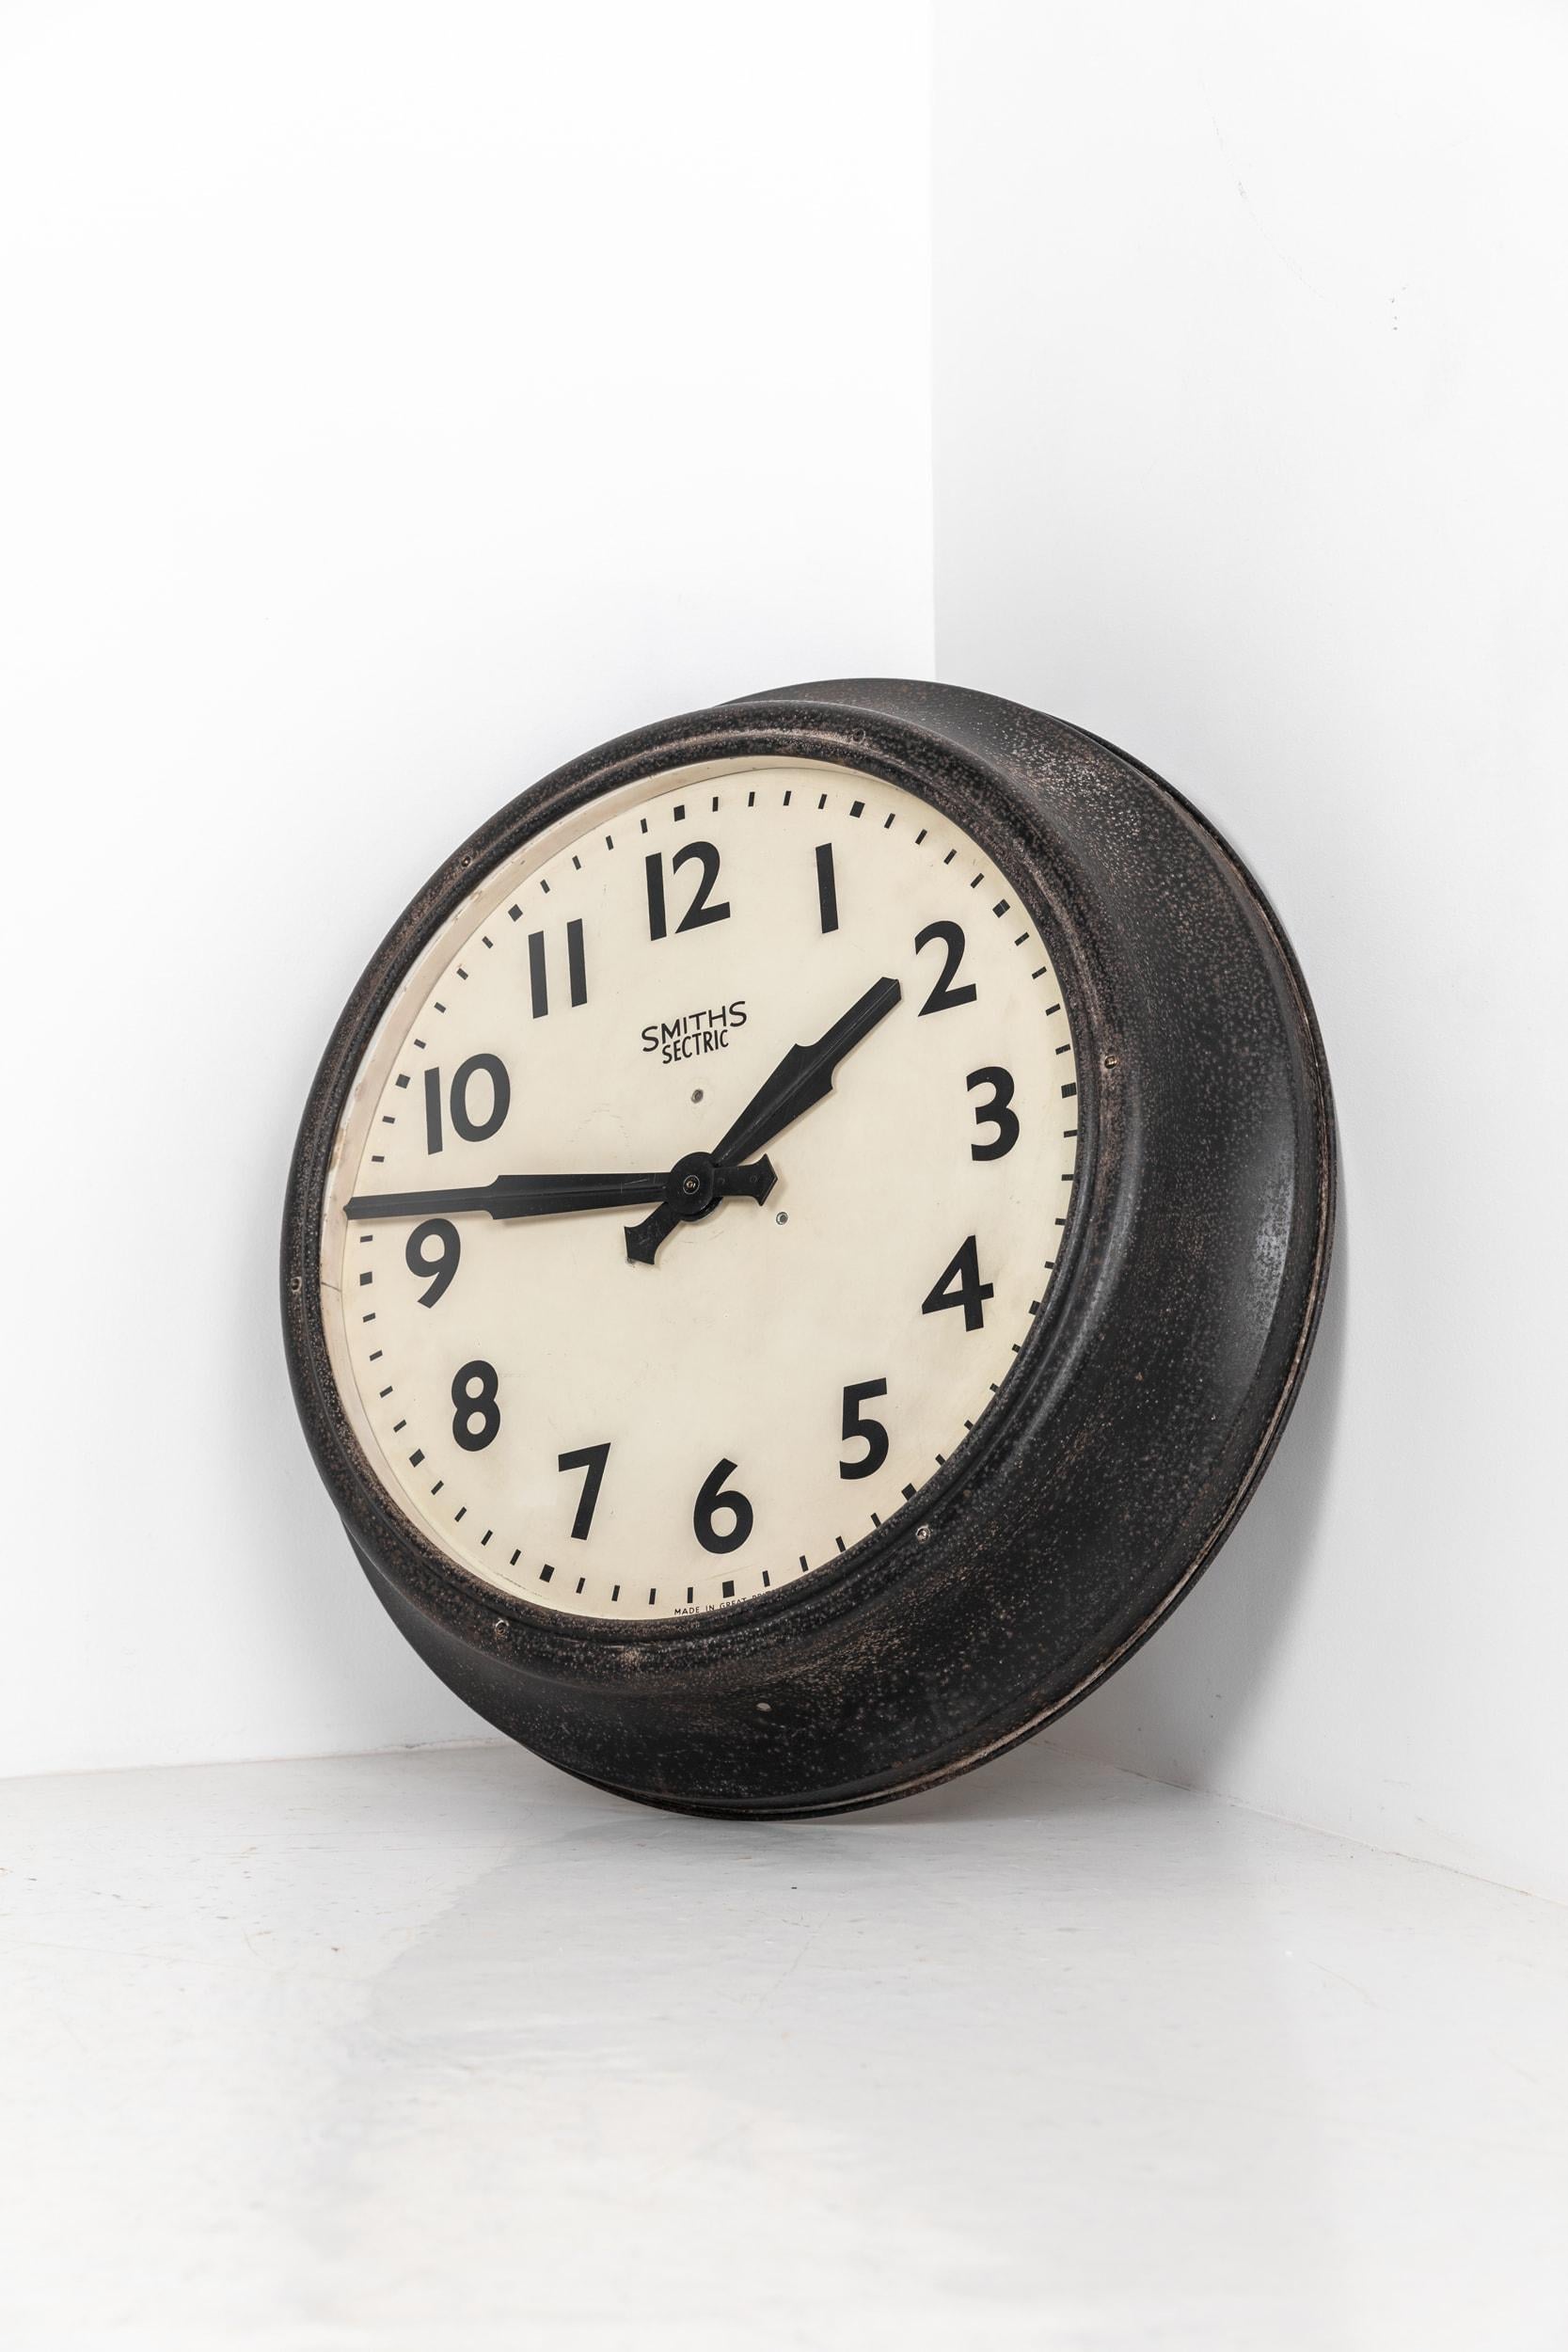 Steel Large Vintage Industrial Art Deco Metal Smiths Electric Wall Clock, circa 1950 For Sale